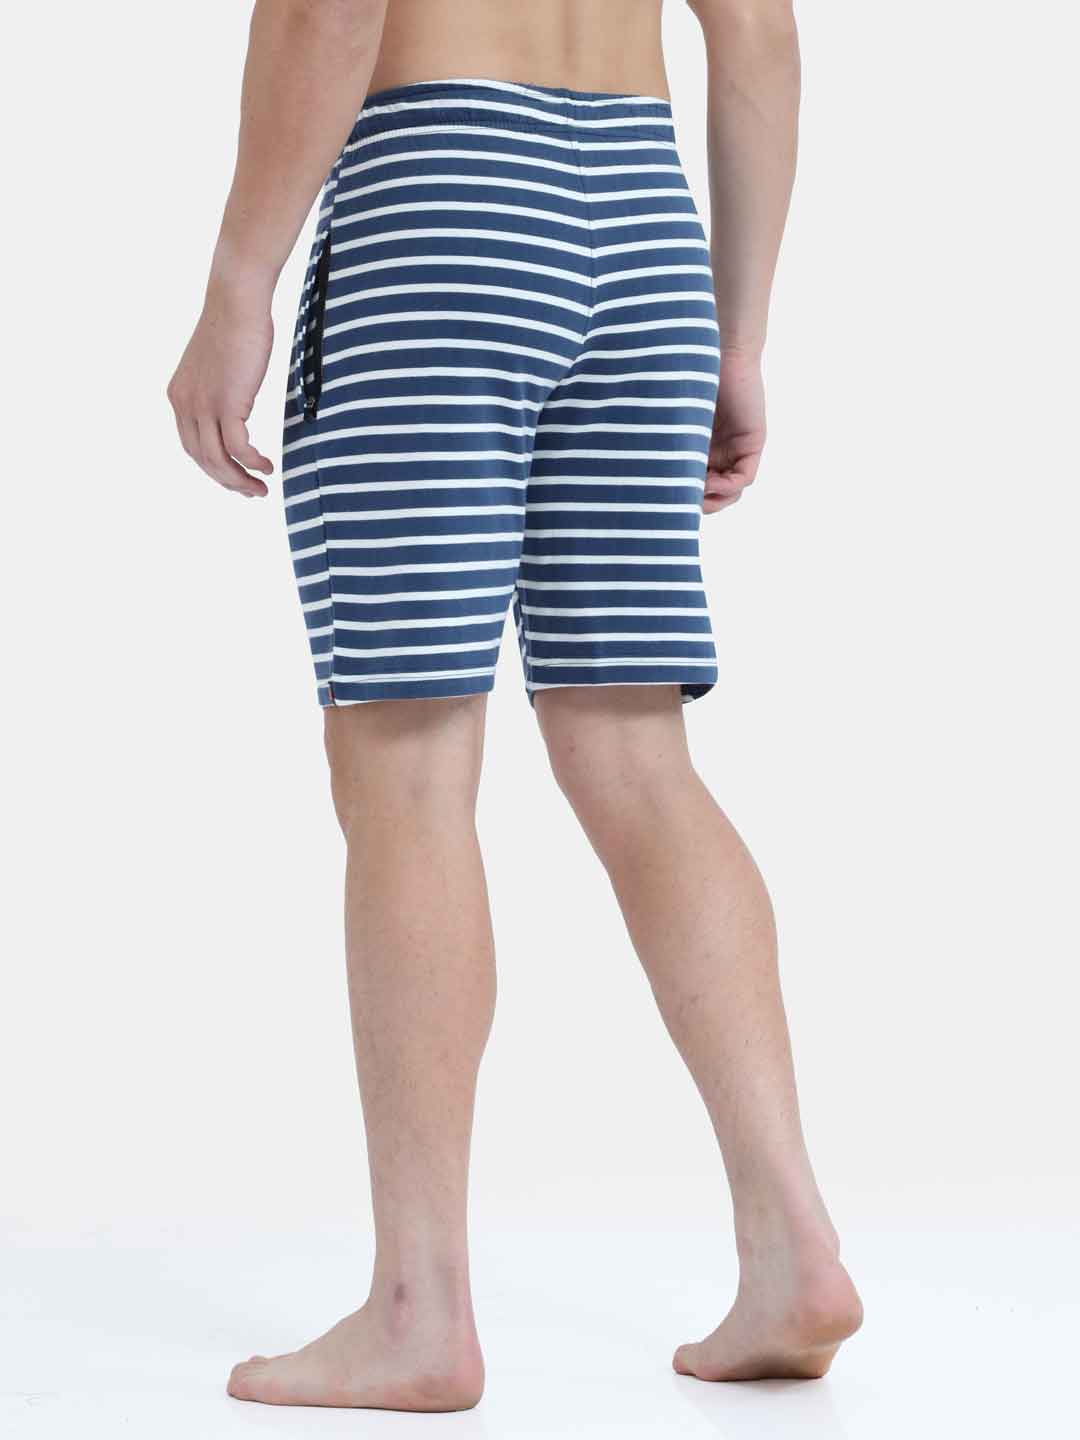 The Stripes All Over Everywear Shorts